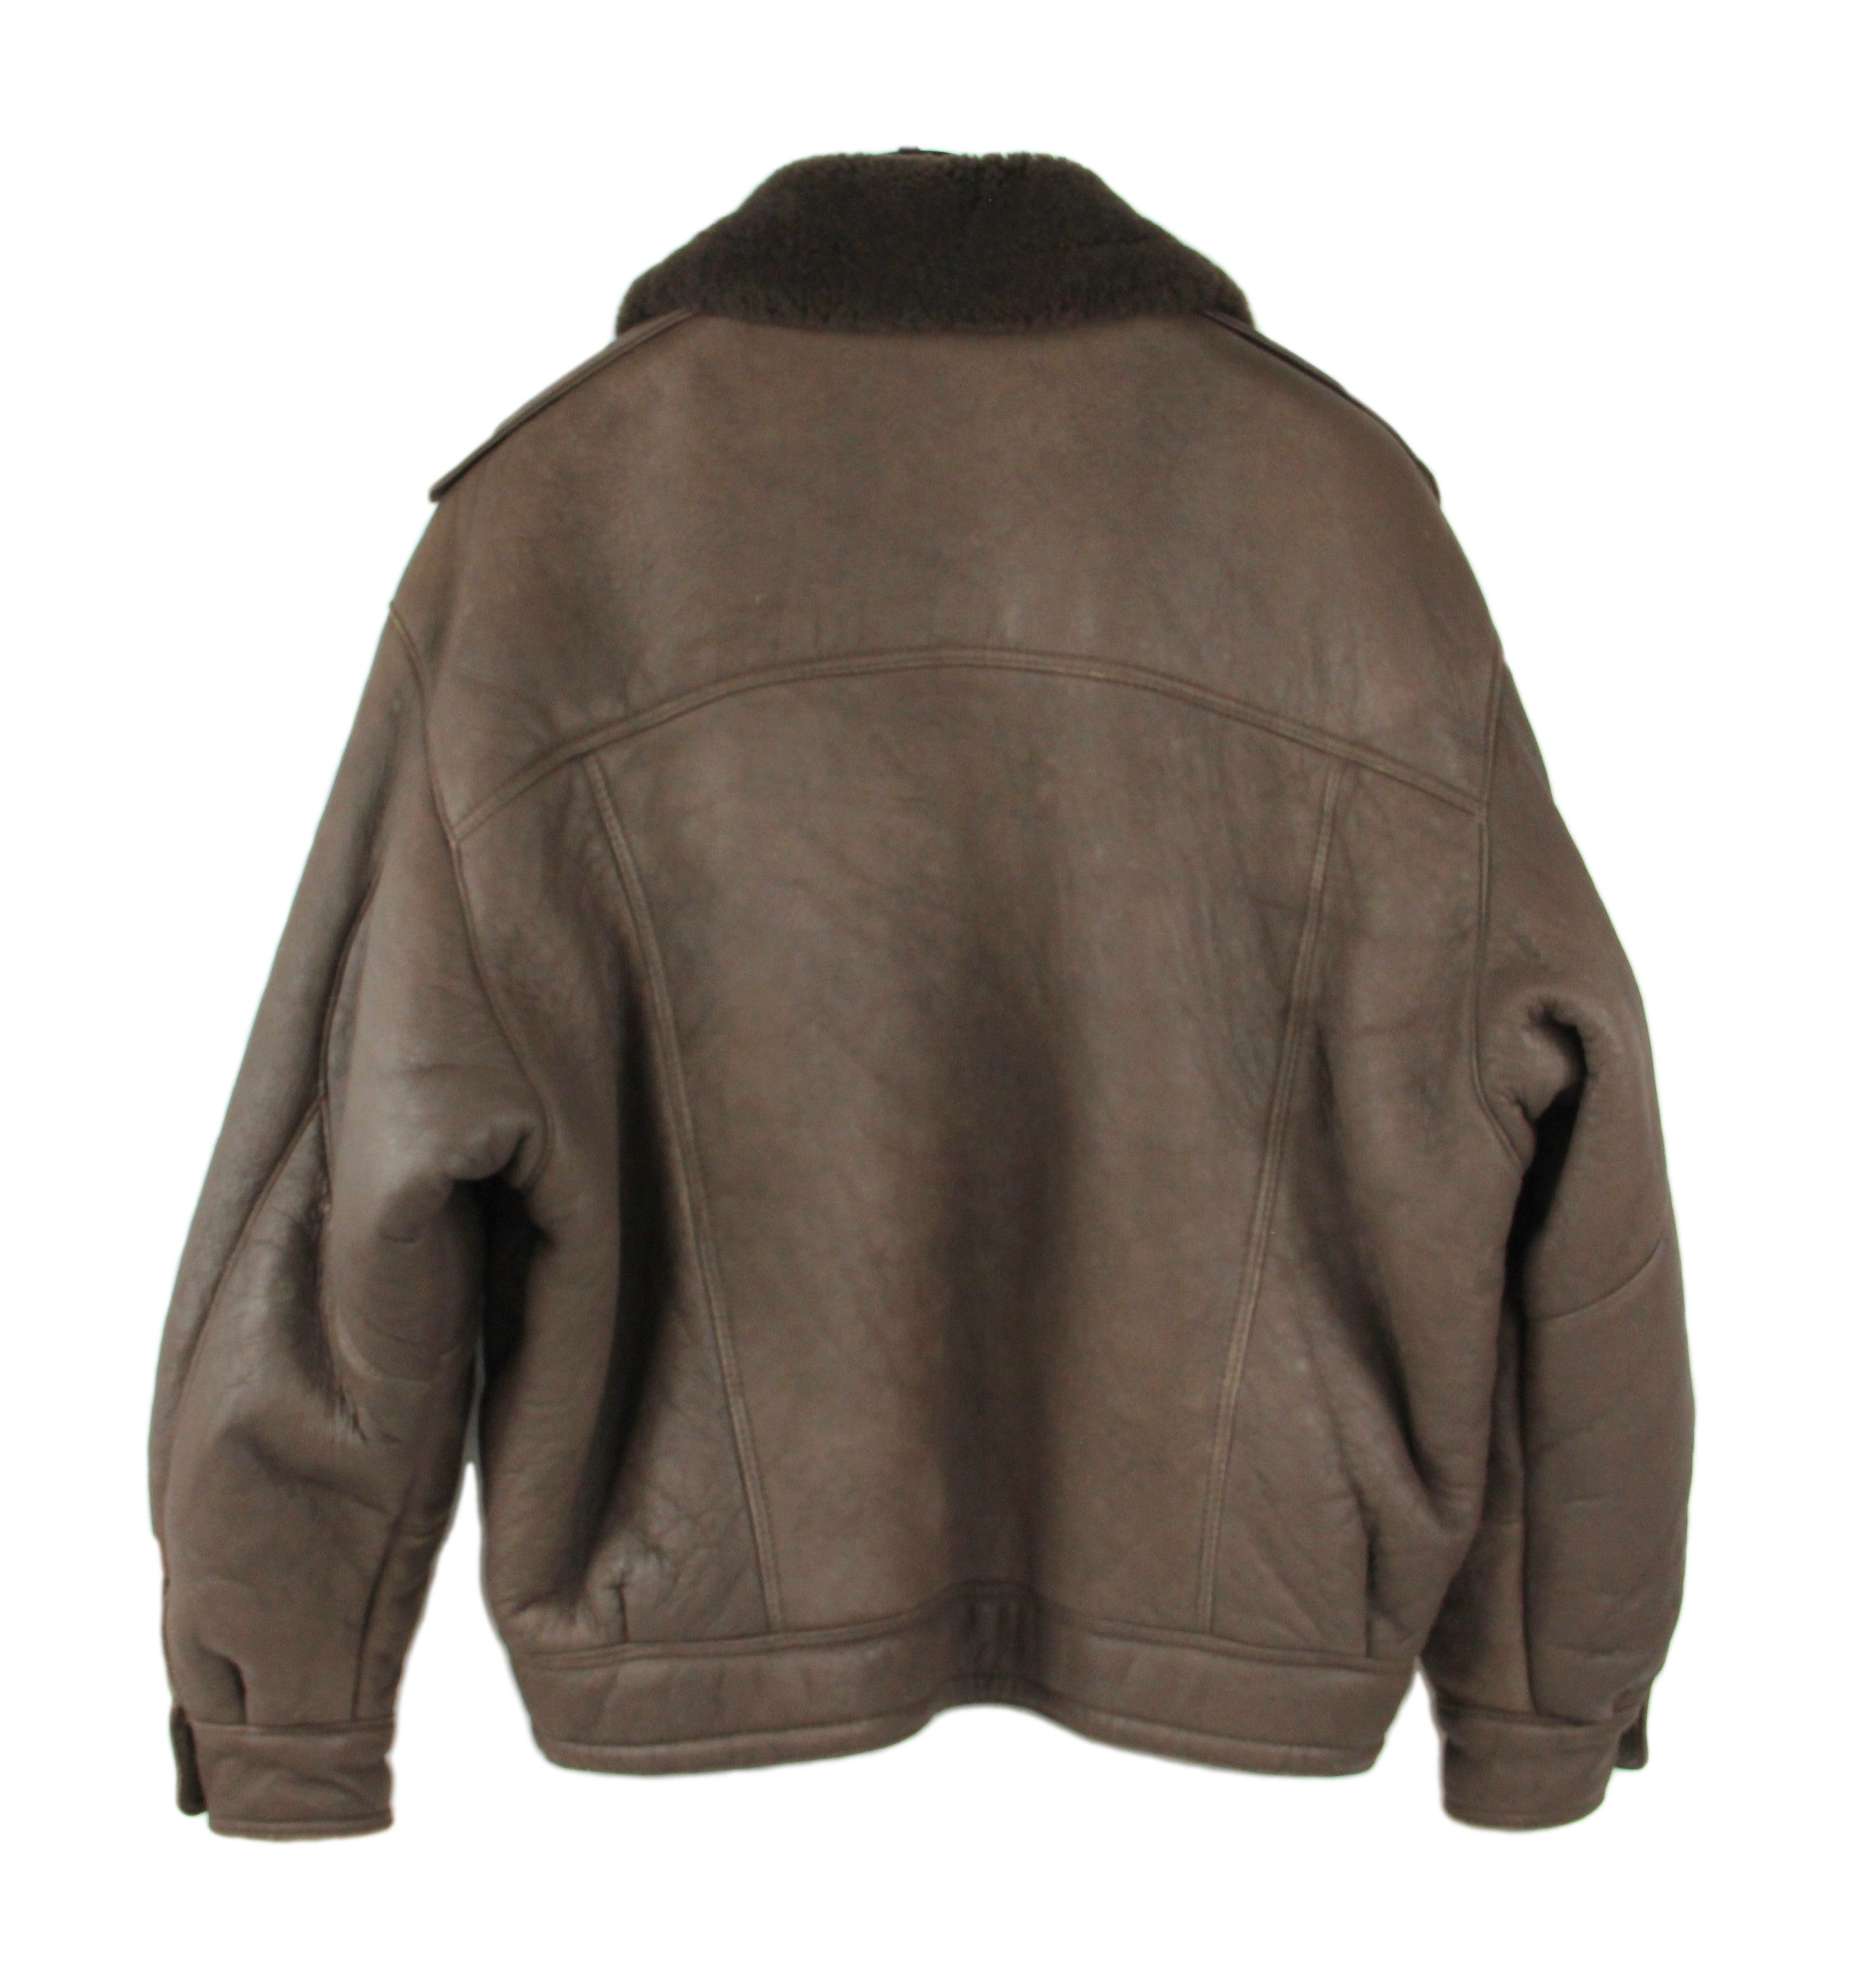 Short Shearling Aviator Style Jacket in Dark Brown, SIZE L - second_first